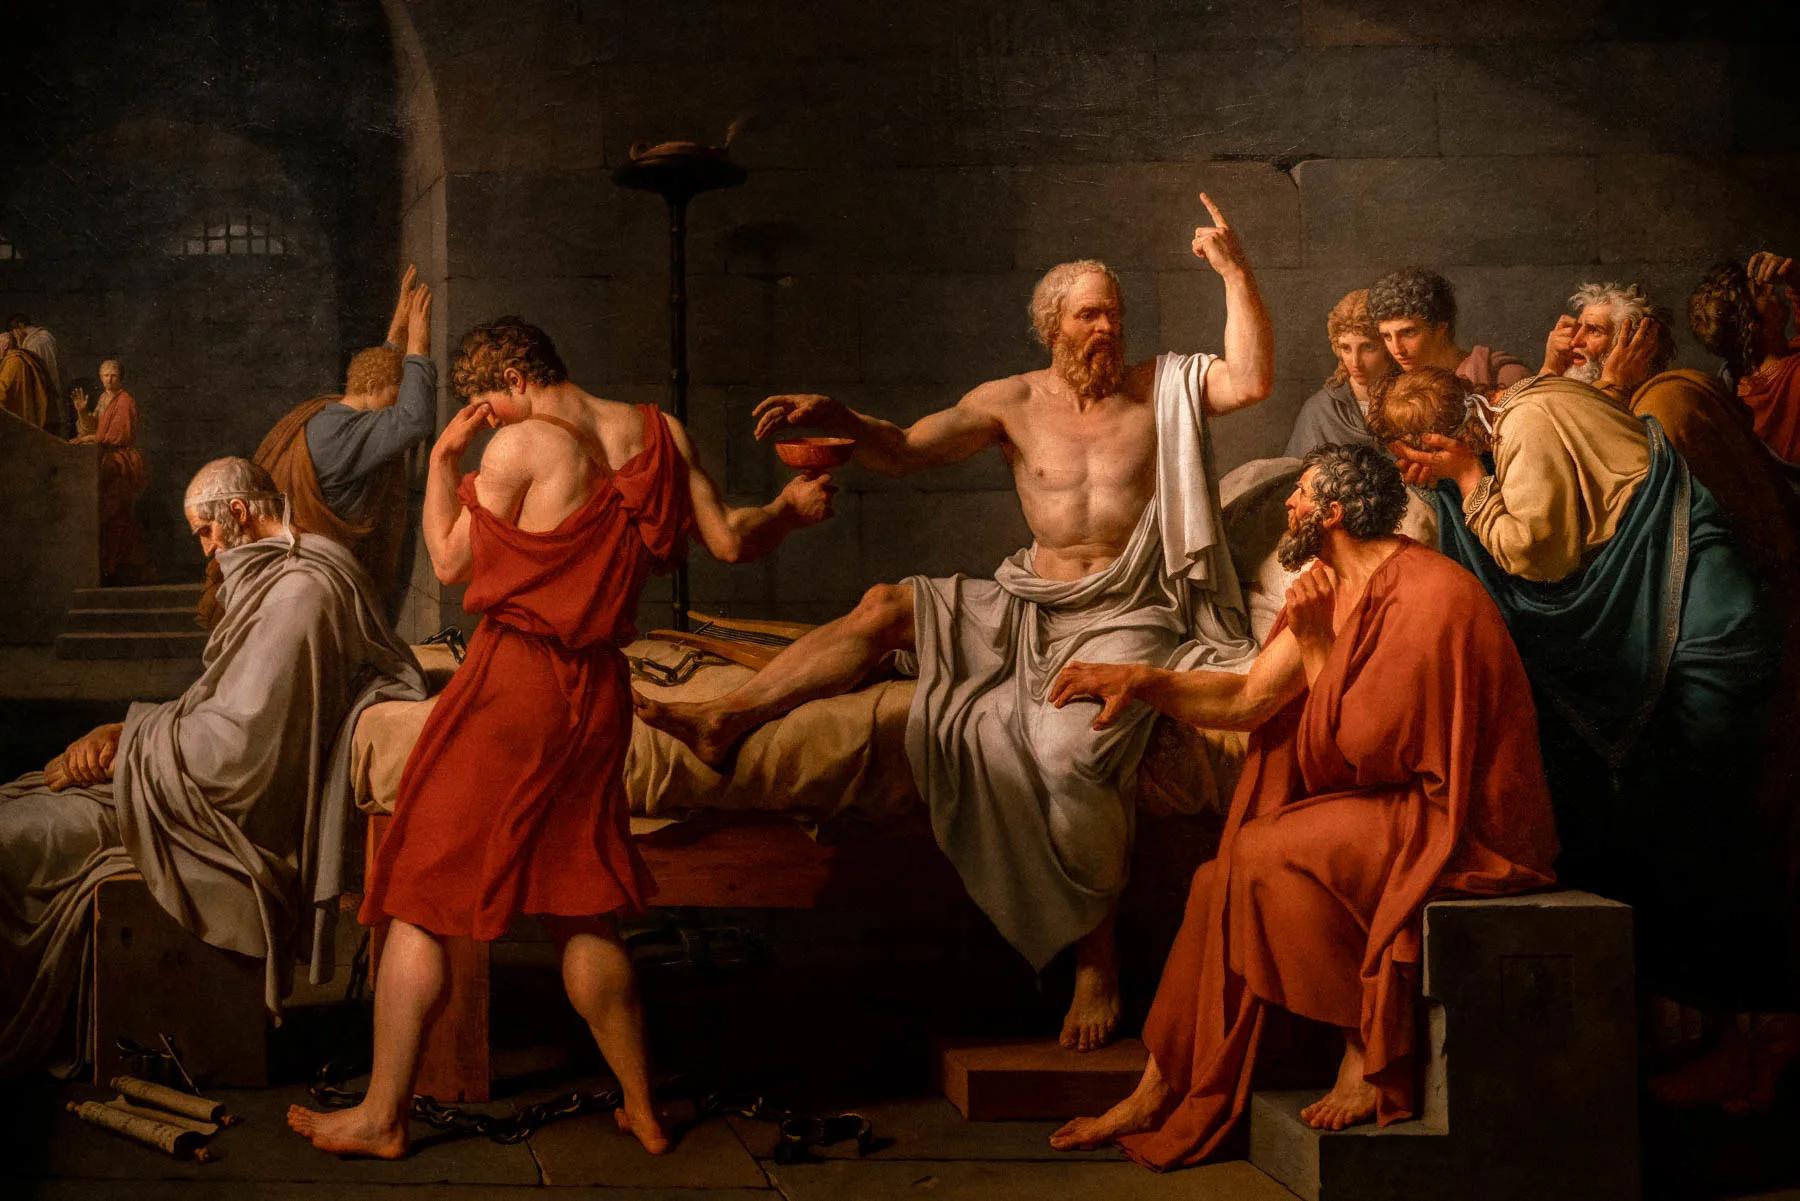 best things to see at the MET NYC
The Death of Socrates painting at the Met